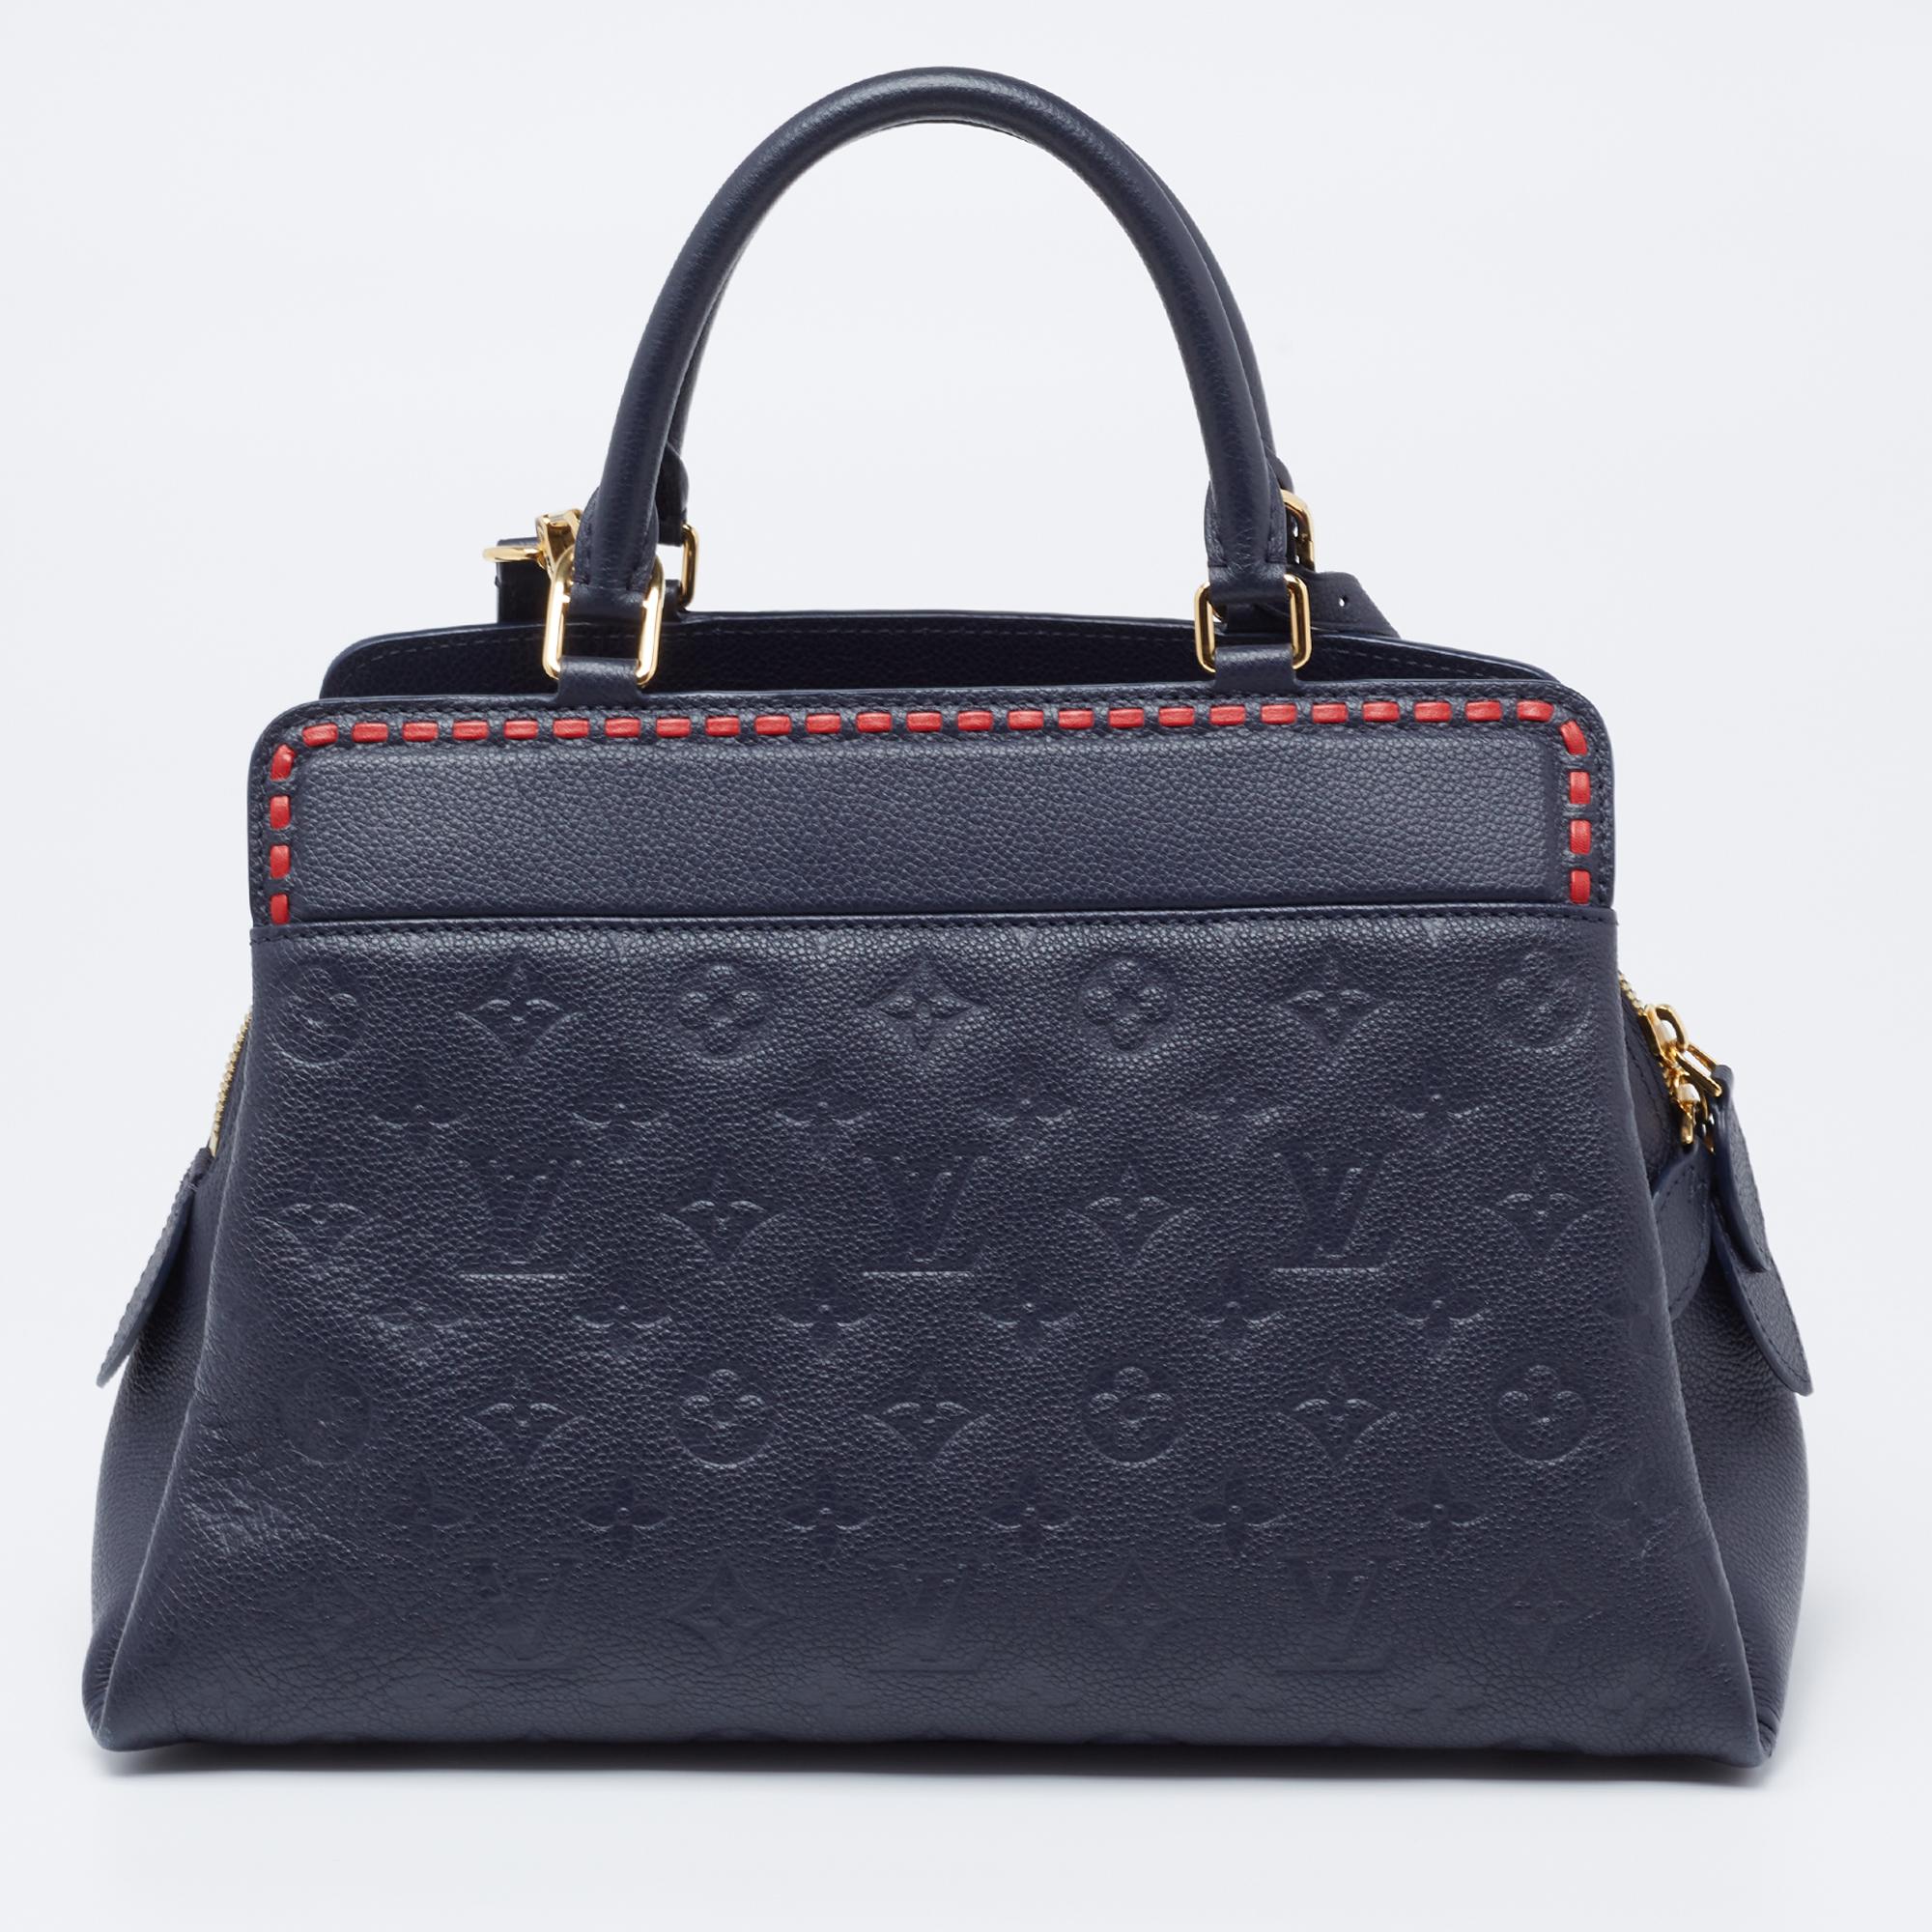 Coming from the House of Louis Vuitton, this stunning Vosges MM bag is an amazing accessory you need to own today. It is made from Bleu Infini Empreinte leather on the exterior. It is adorned with gold-tone hardware and unveils a spacious